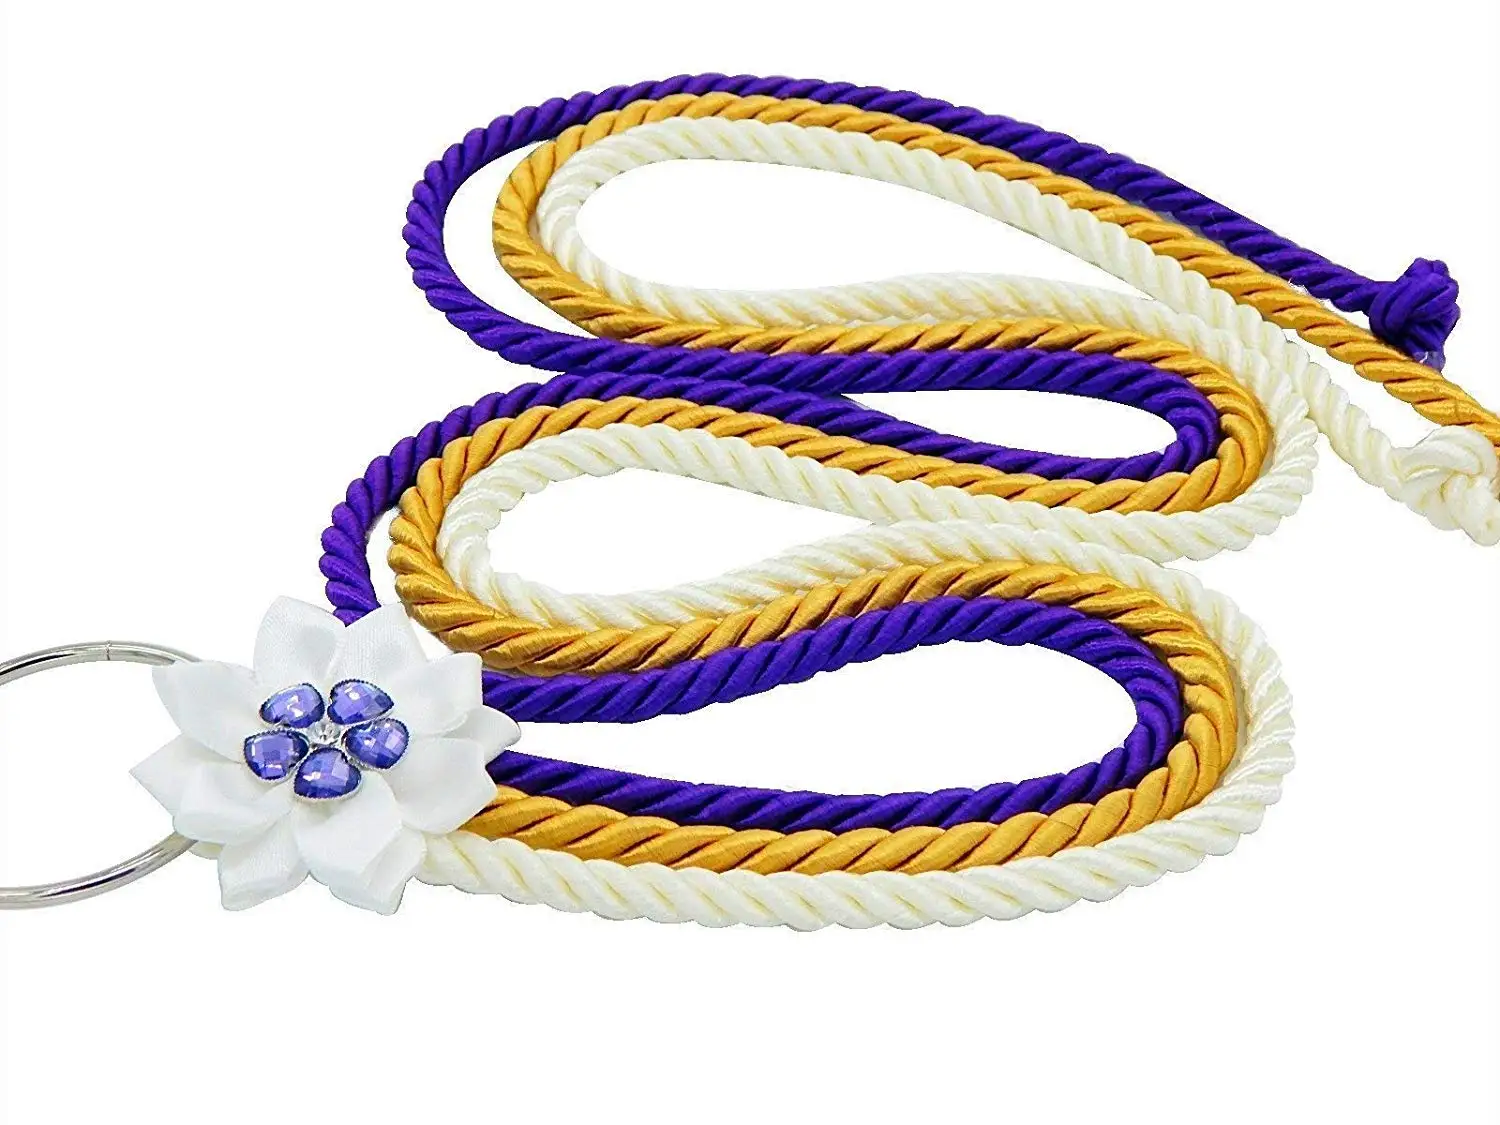 Buy Unity Braids A Cord Of Three Strands Wedding Cords Lasso In